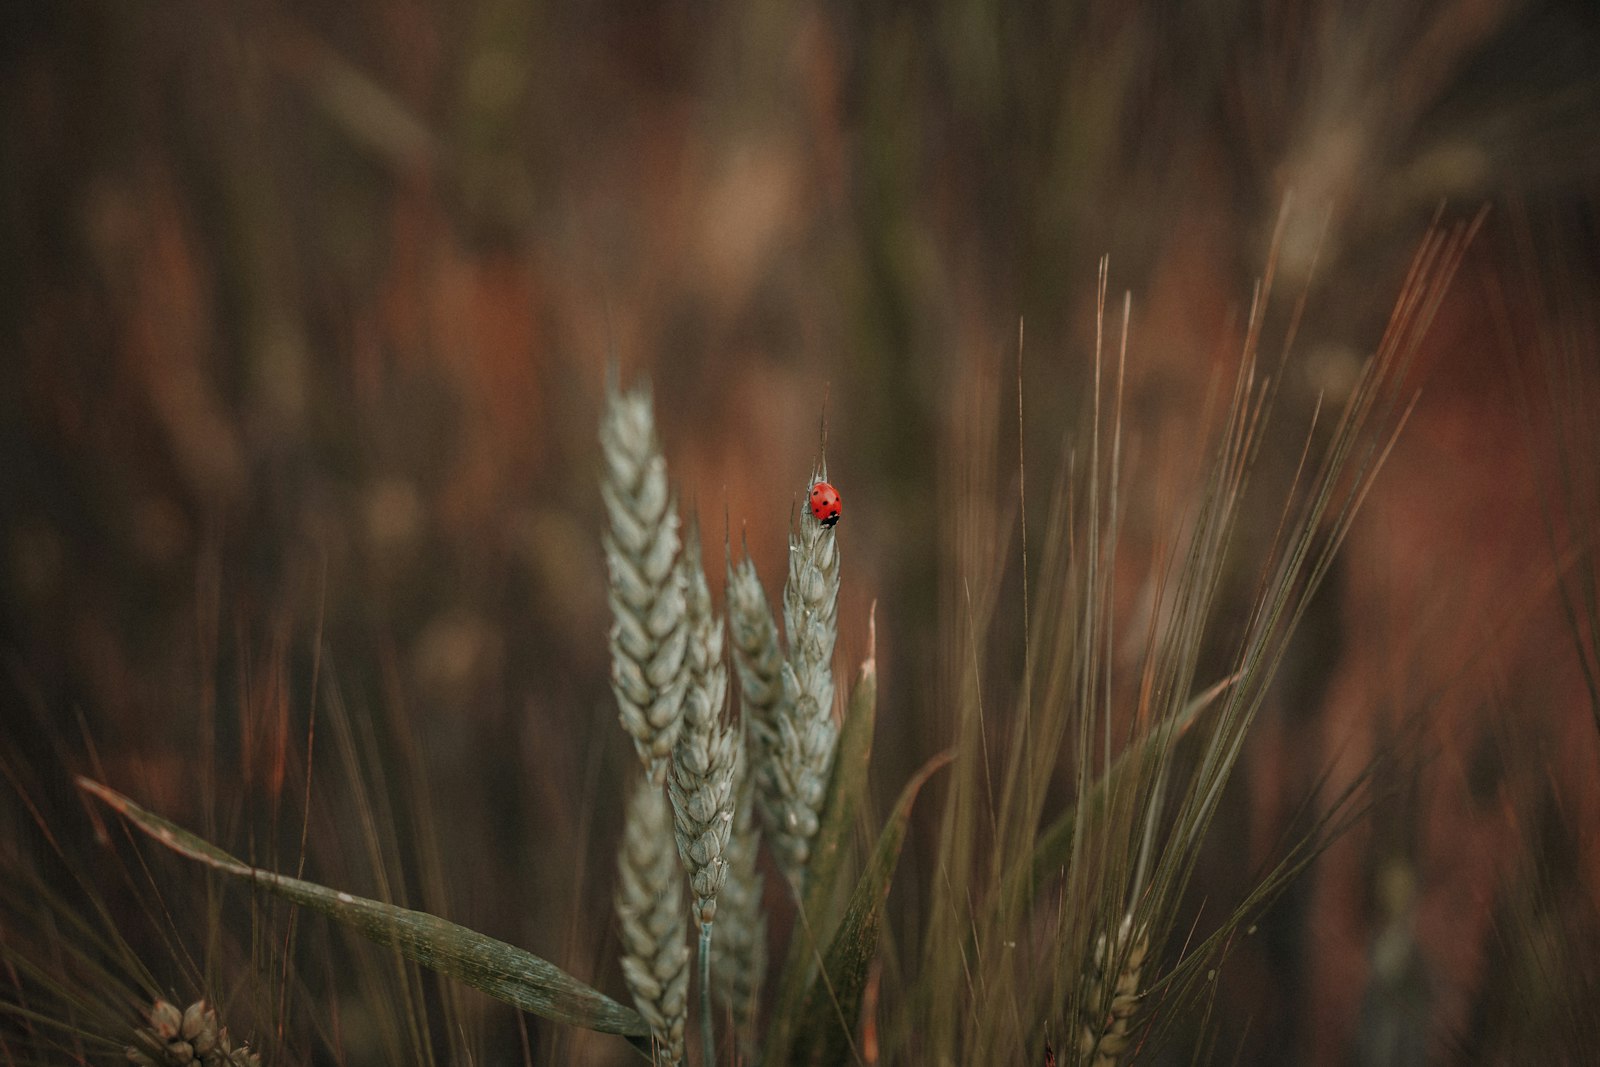 Sony a7 III + Sony Sonnar T* FE 55mm F1.8 ZA sample photo. Red ladybug perched on photography